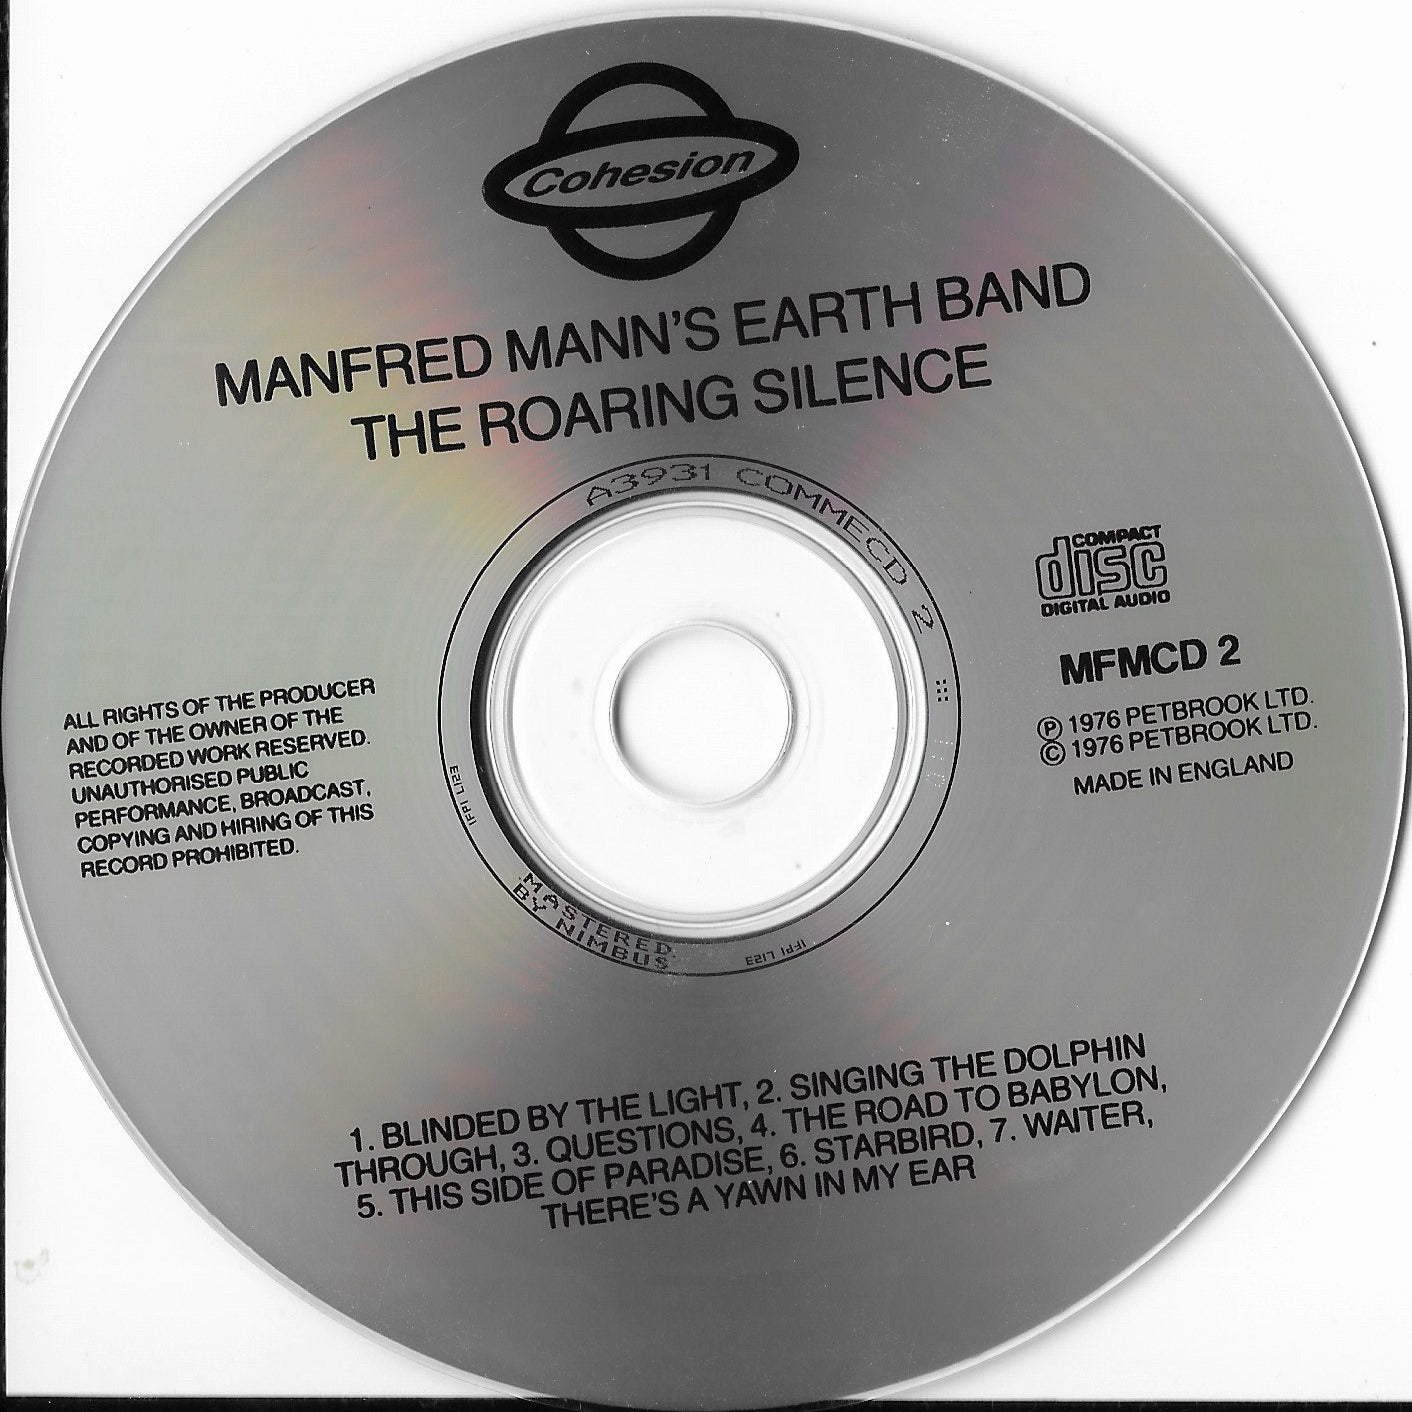 MANFRED MANN'S EARTH BAND - The Roaring Silence